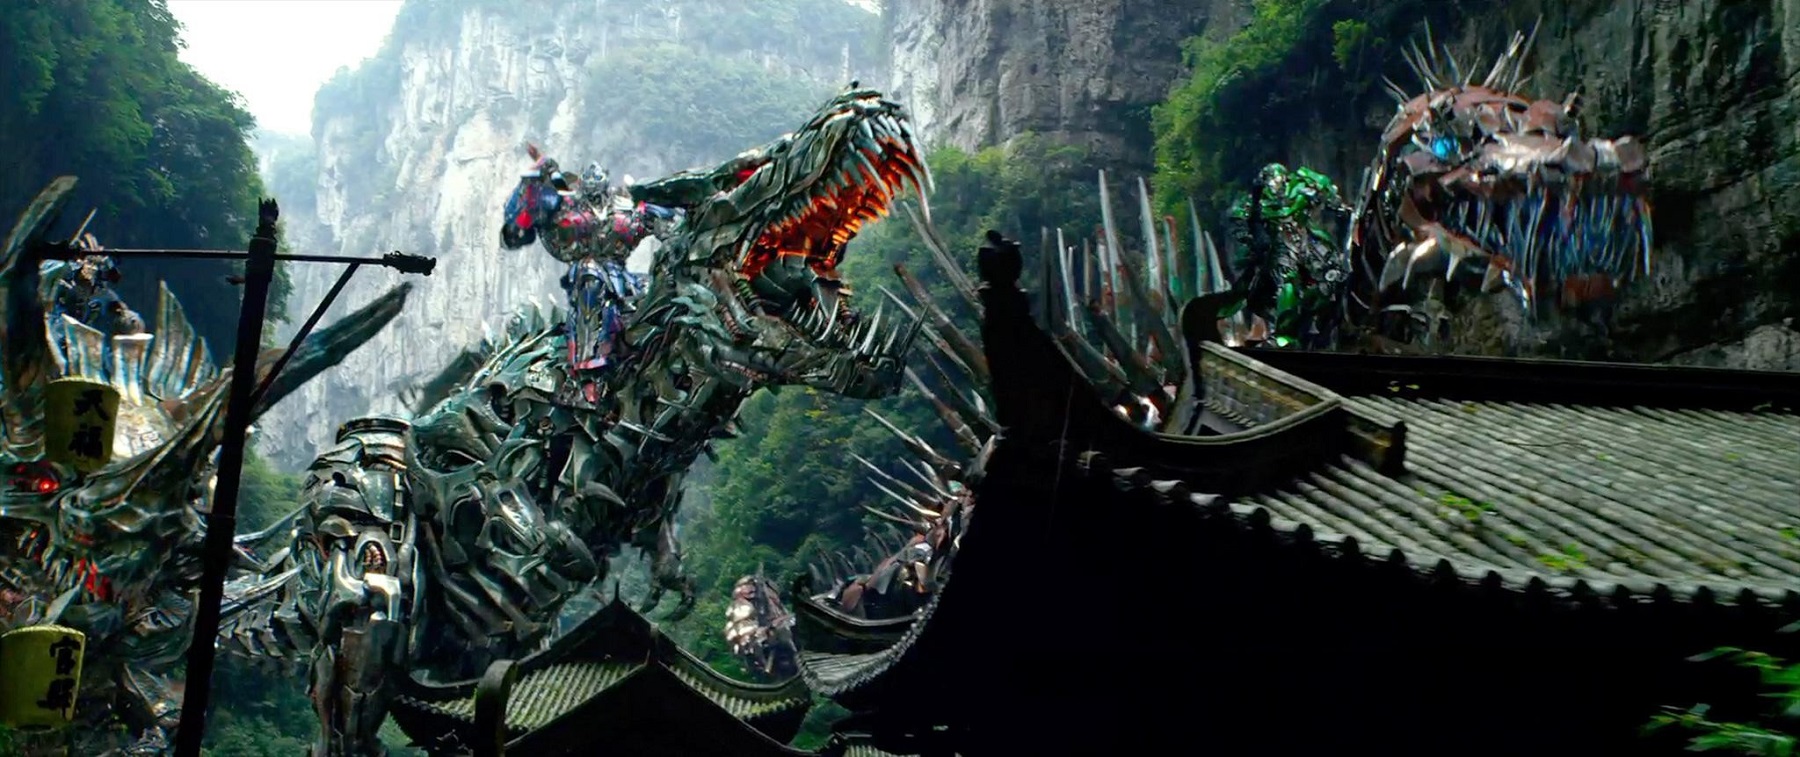 all dinobots in transformers 4